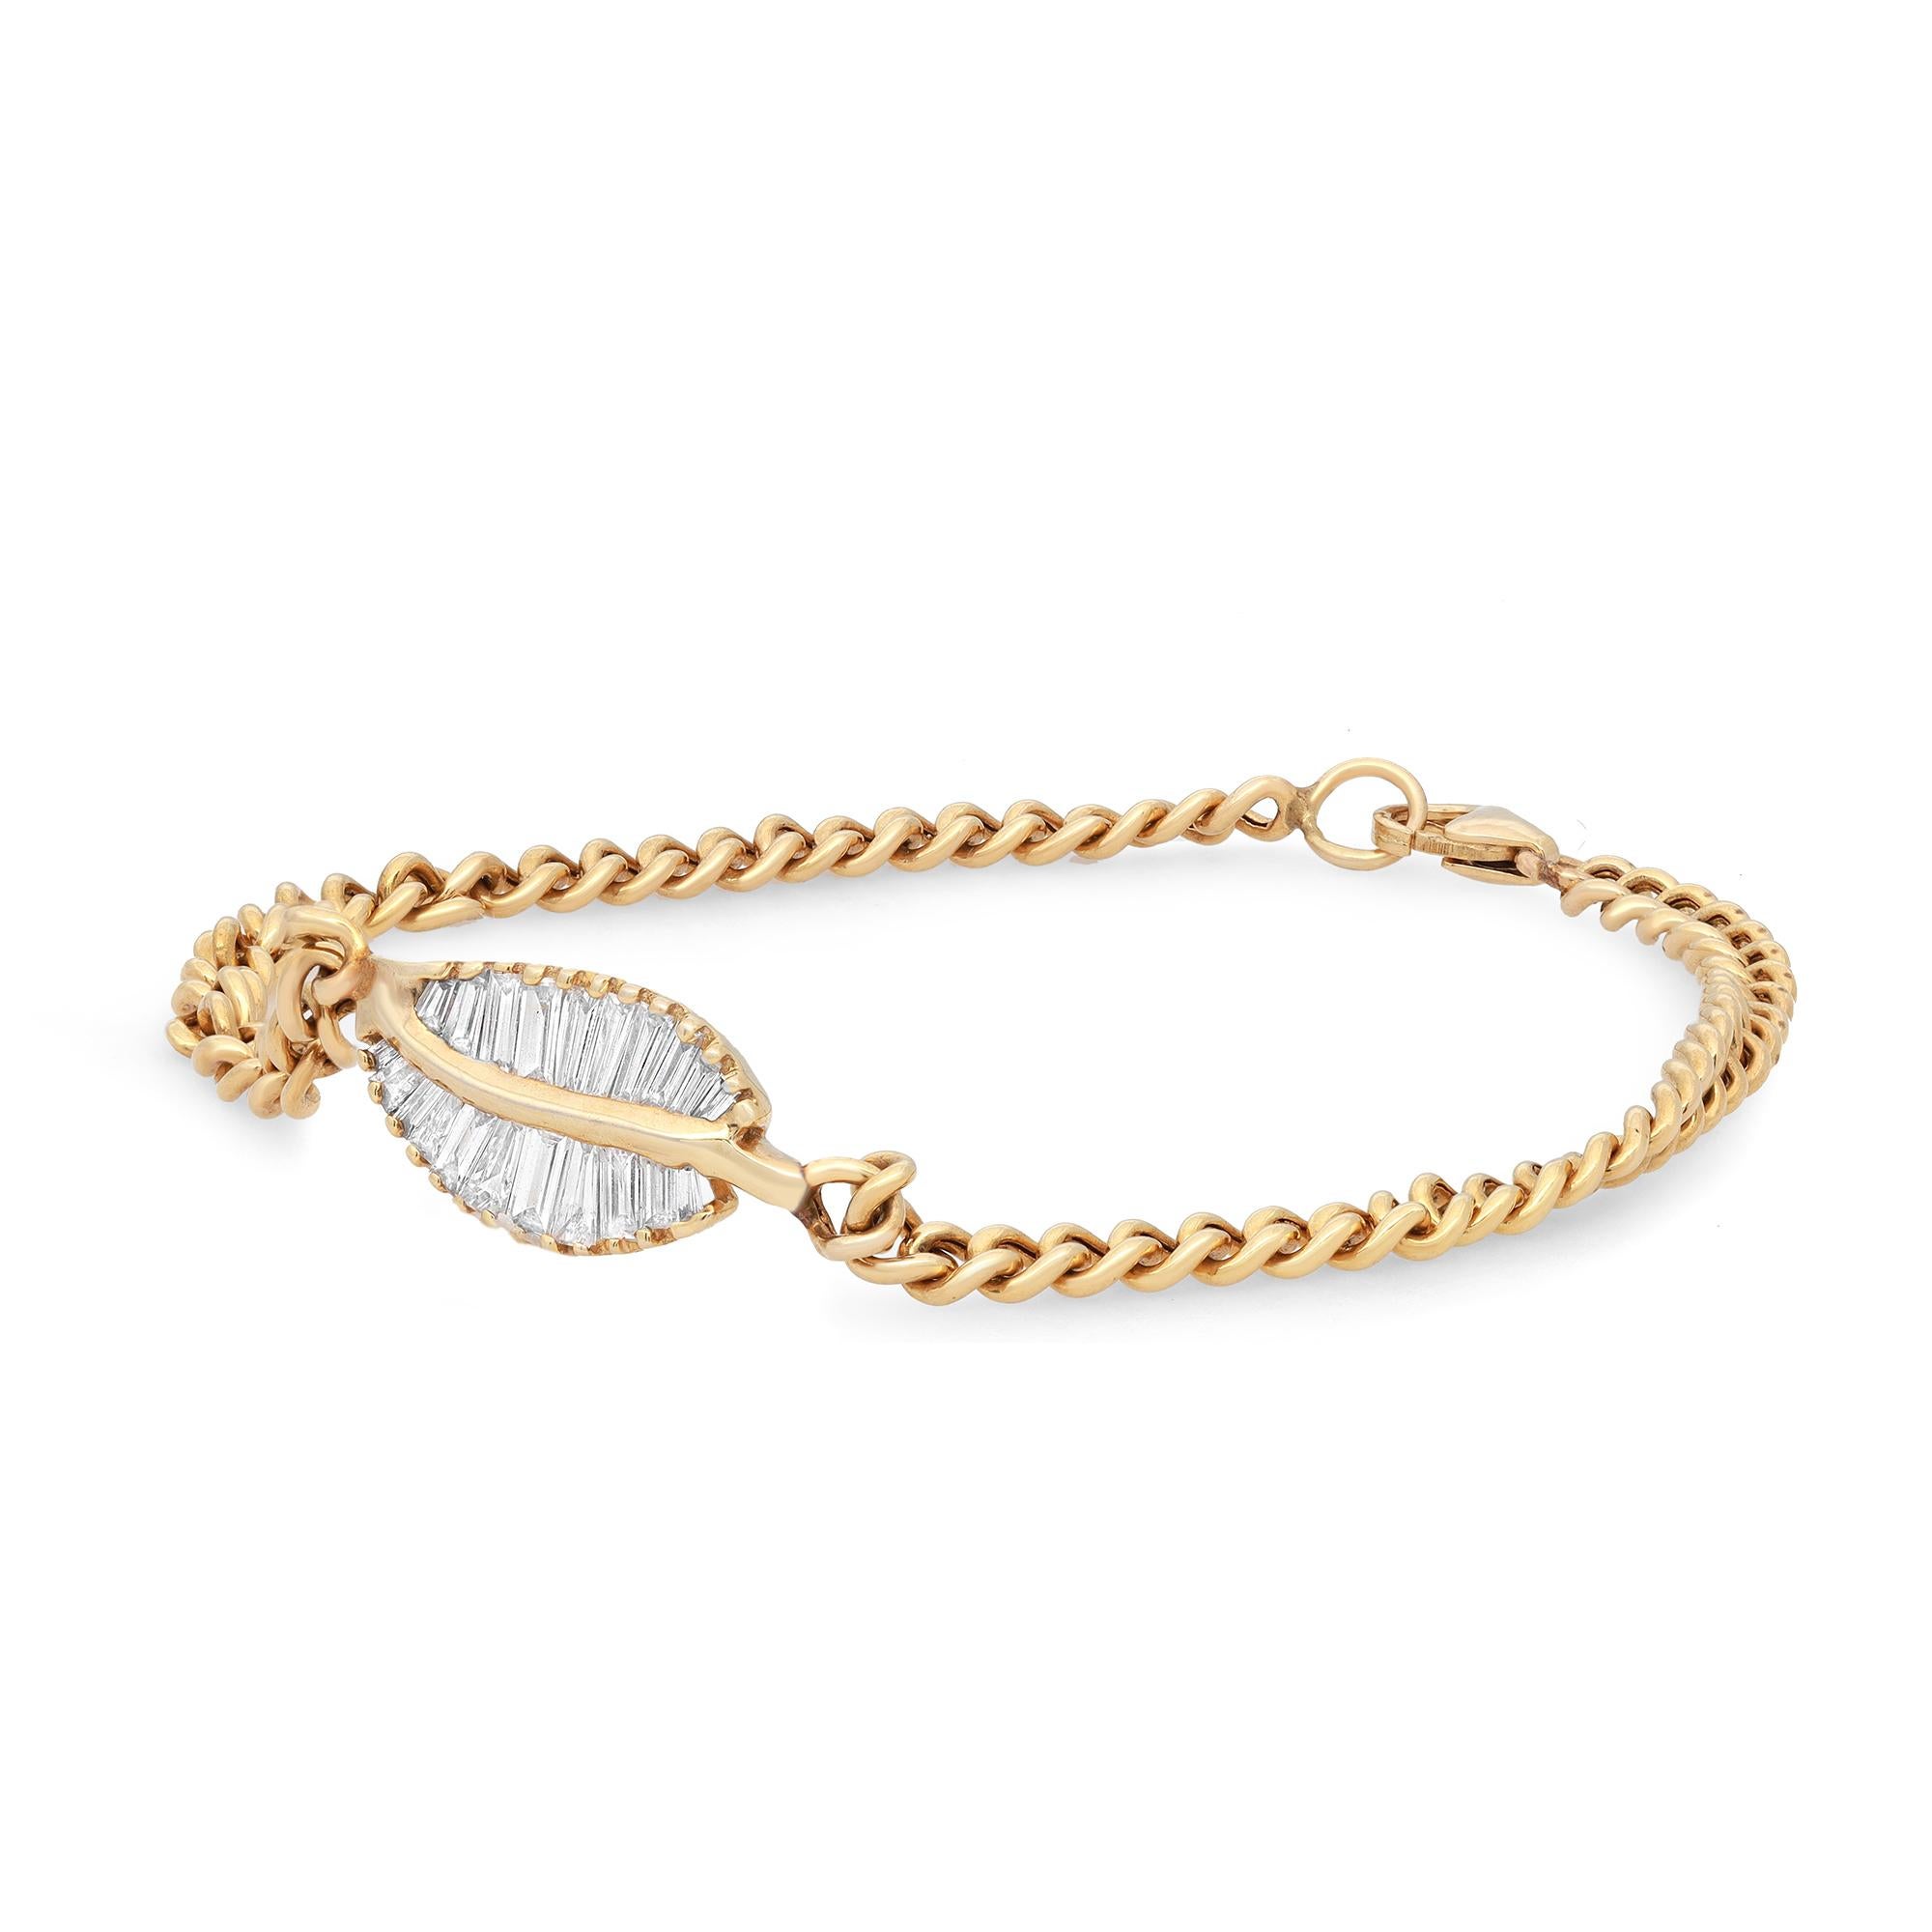 Embrace this classic Cuban link chain bracelet for the perfect everyday look. This sleek elegant bracelet features channel set baguette cut diamonds set in a leaf charm in the center. Crafted in high polish 14k yellow gold. Total diamond weight: